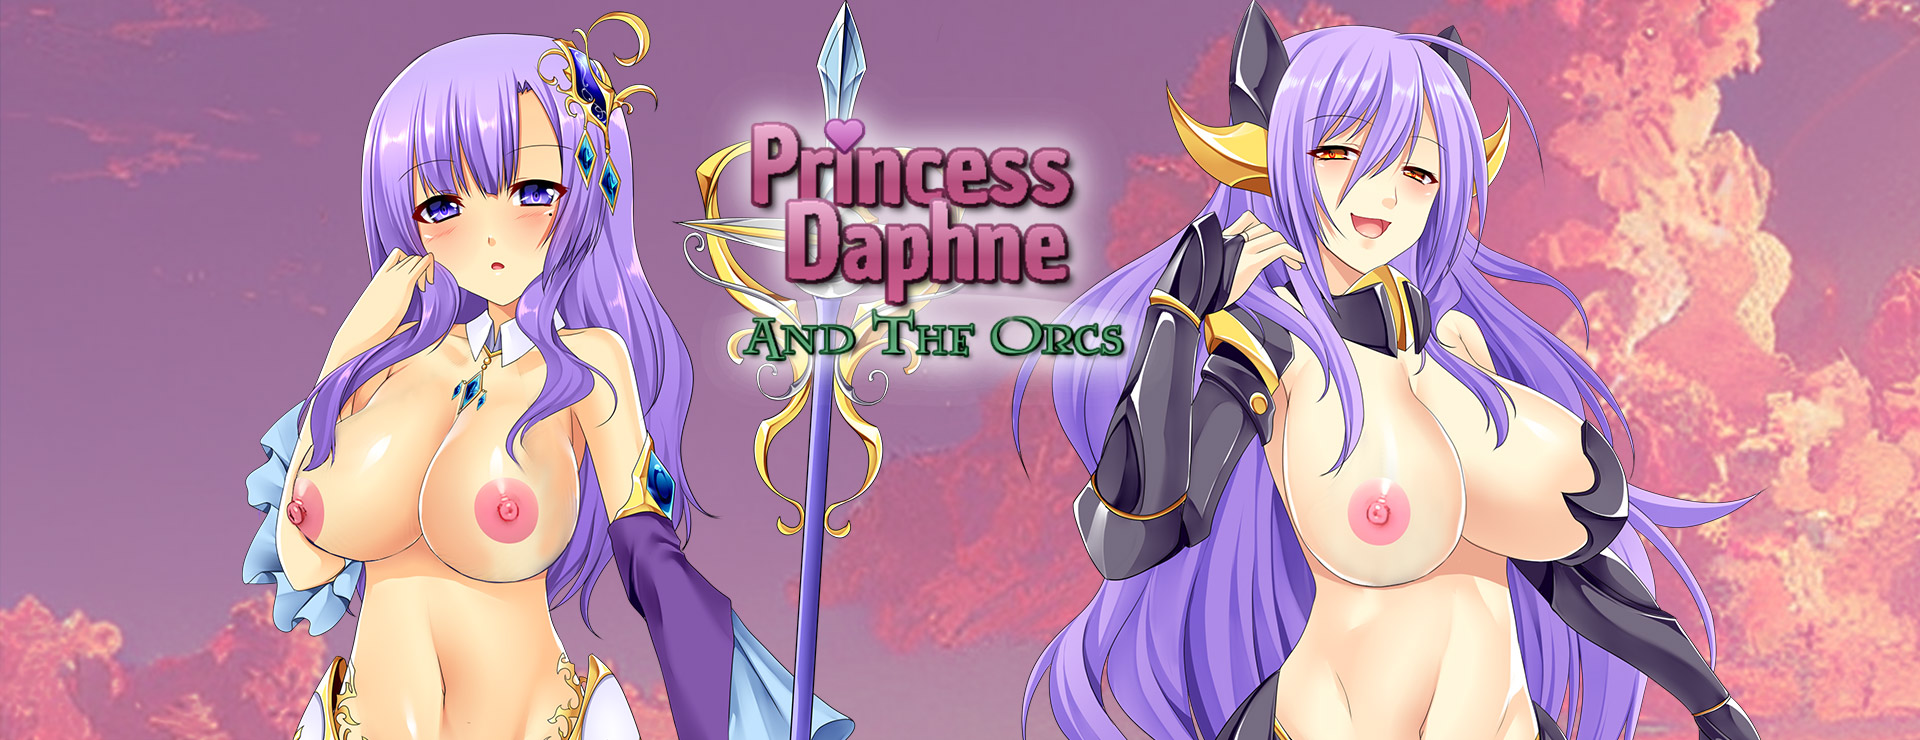 Princess Daphne and the Orcs - RPG Game